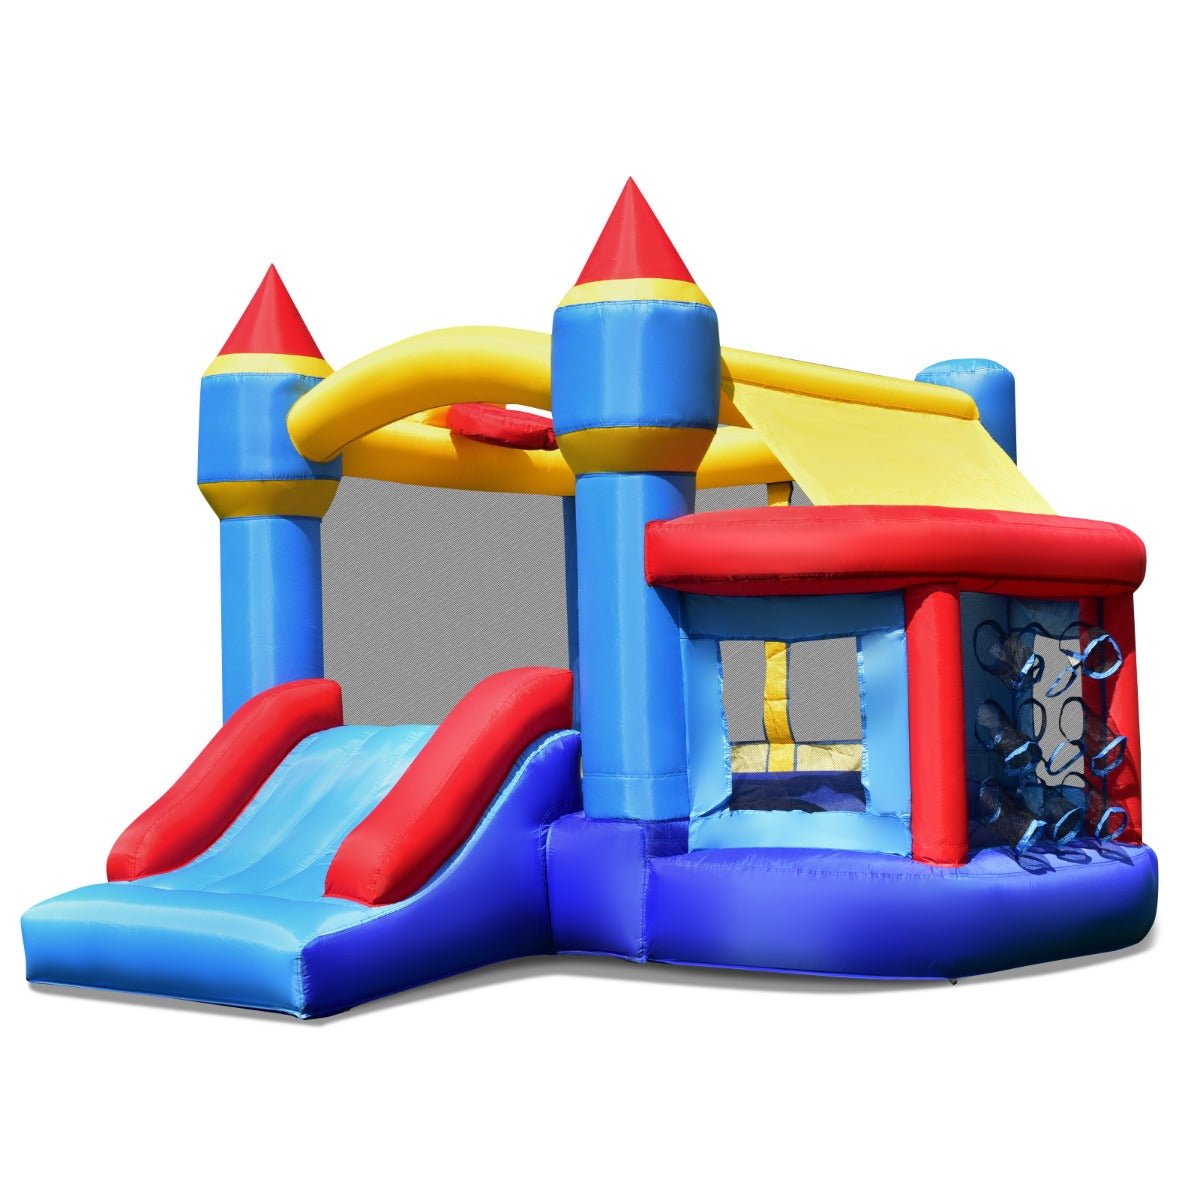 Wholesome Outdoor Play: Multifunctional Inflatable Bouncer with Slide (Blower)